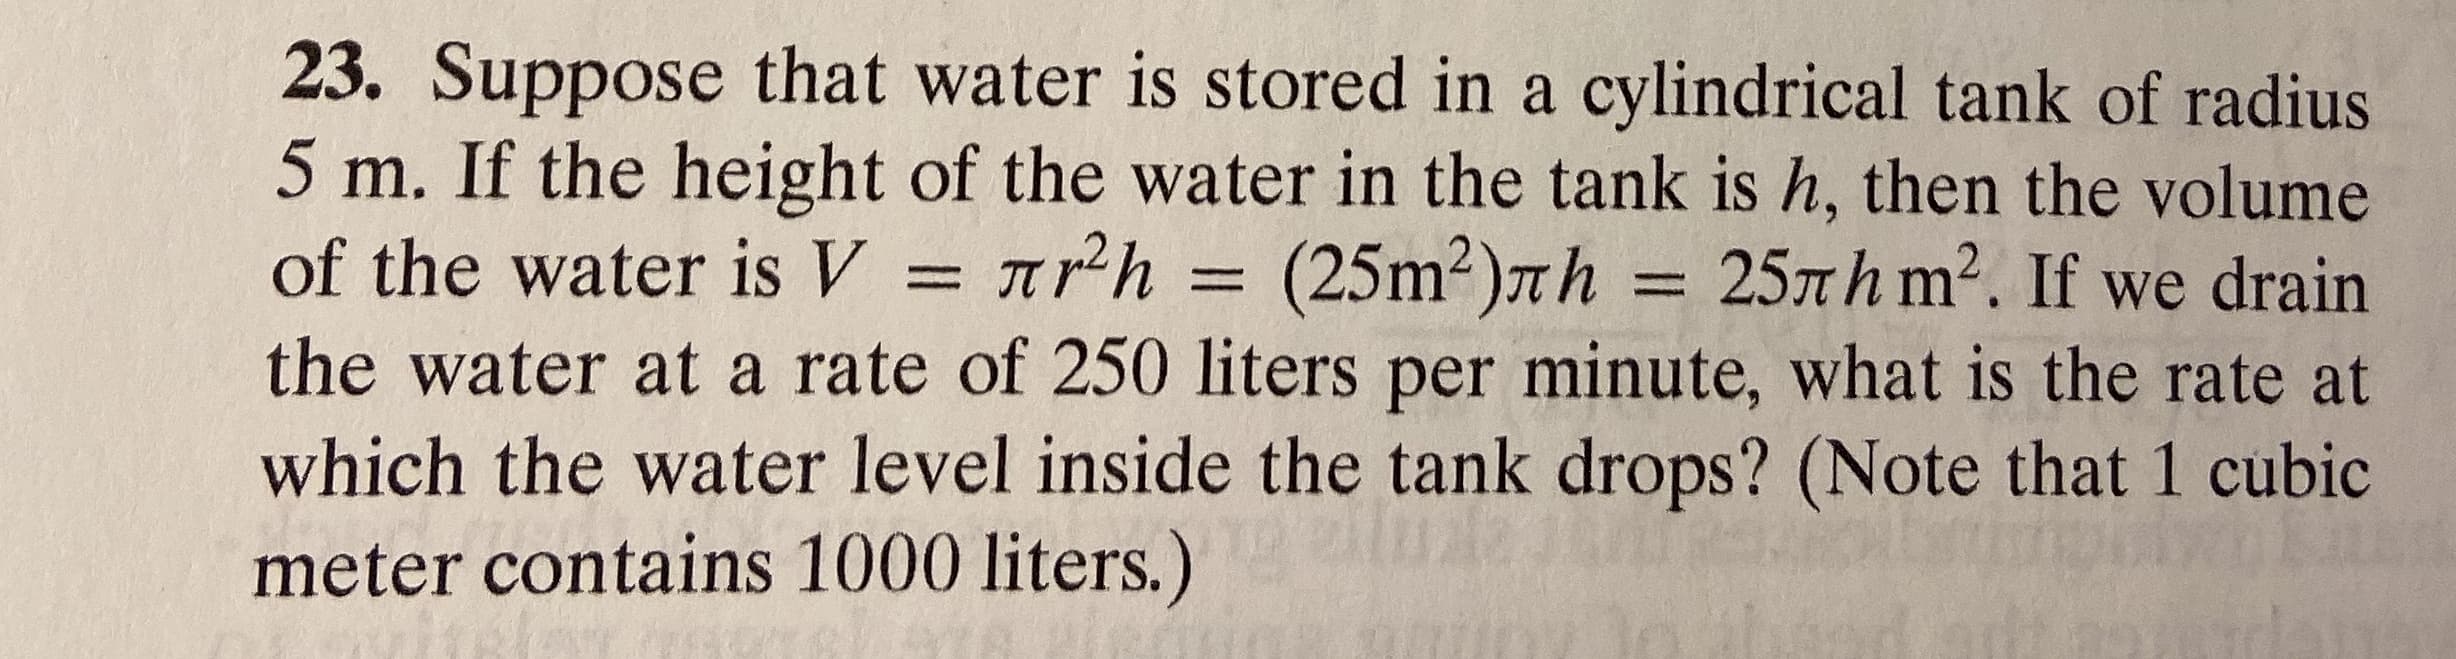 23. Suppose that water is stored in a cylindrical tank of radius
5 m. If the height of the water in the tank is h, then the volume
of the water is V = 7.
the water at a rate of 250 liters per minute, what is the rate at
which the water level inside the tank drops? (Note that 1 cubic
meter contains 1000 liters.)
h = (25m2)7h = 25mh m2. If we drain
